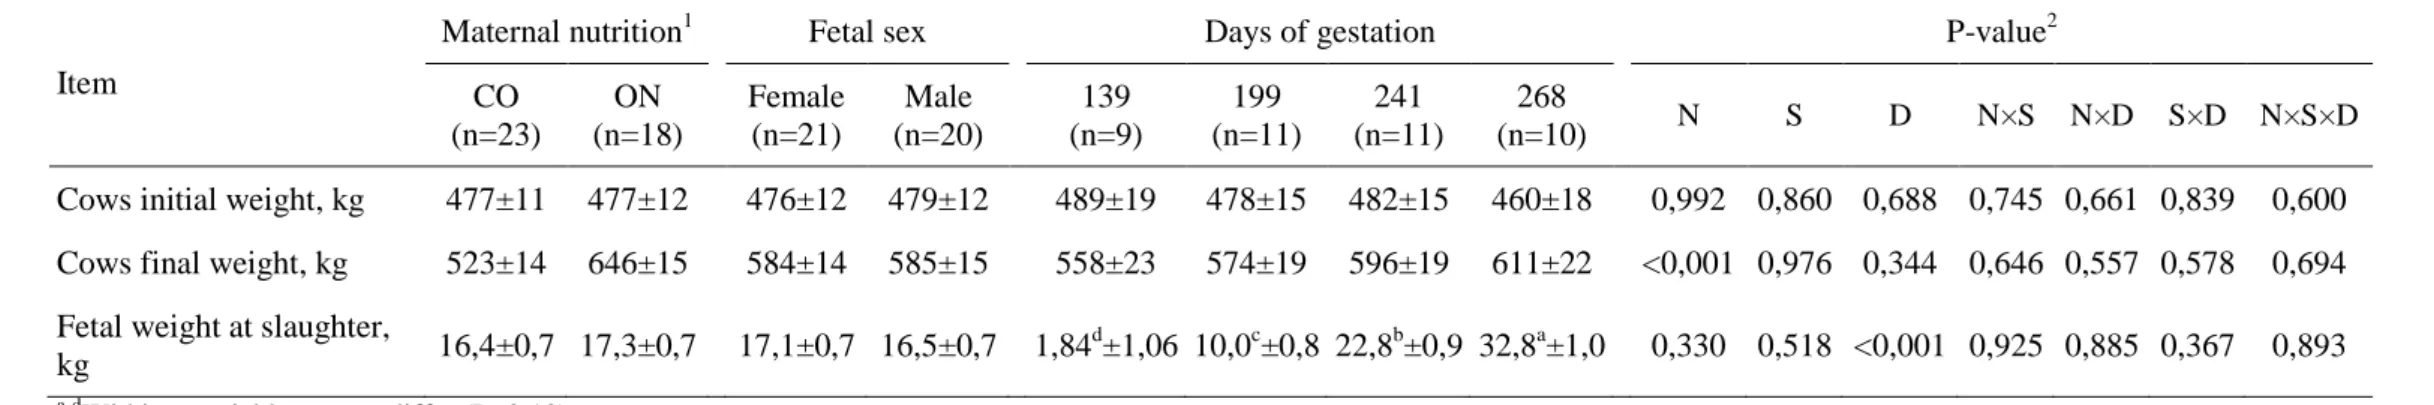 Table 1. Least square means ± standard errors of the means of the effects of maternal feeding level, fetal sex and days of gestation on initial and final cow live  weight and fetal weight 